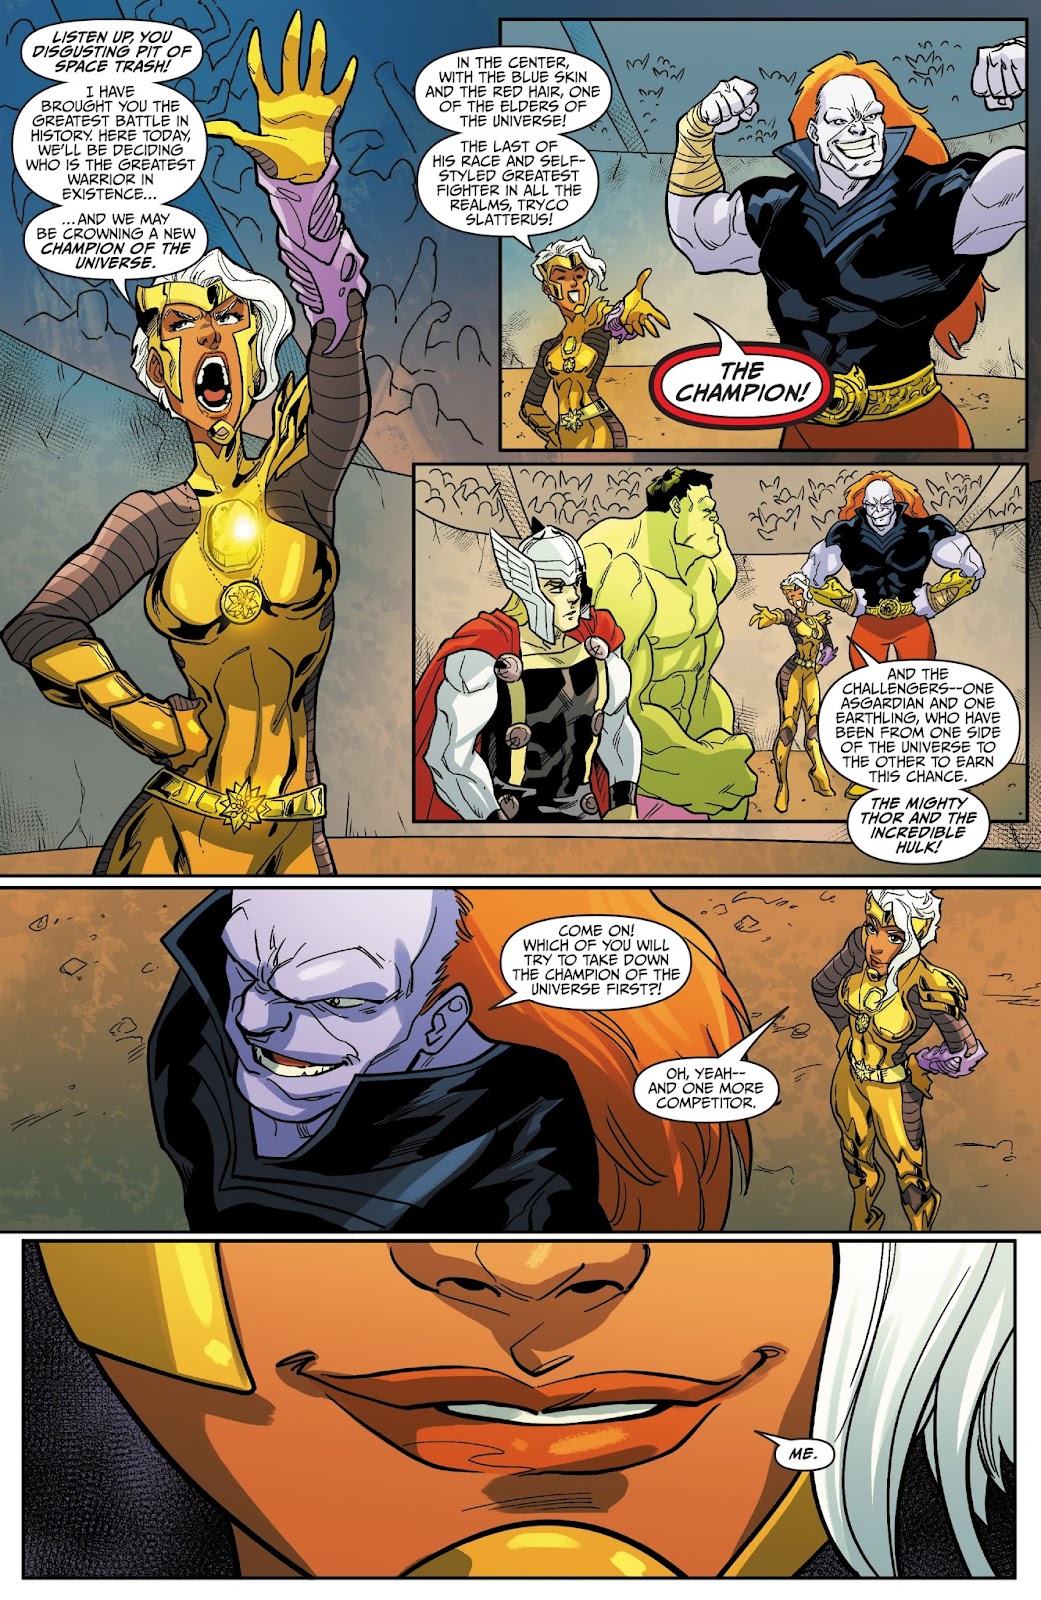 Thor vs. Hulk: Champions of the Universe issue 6 - Page 9